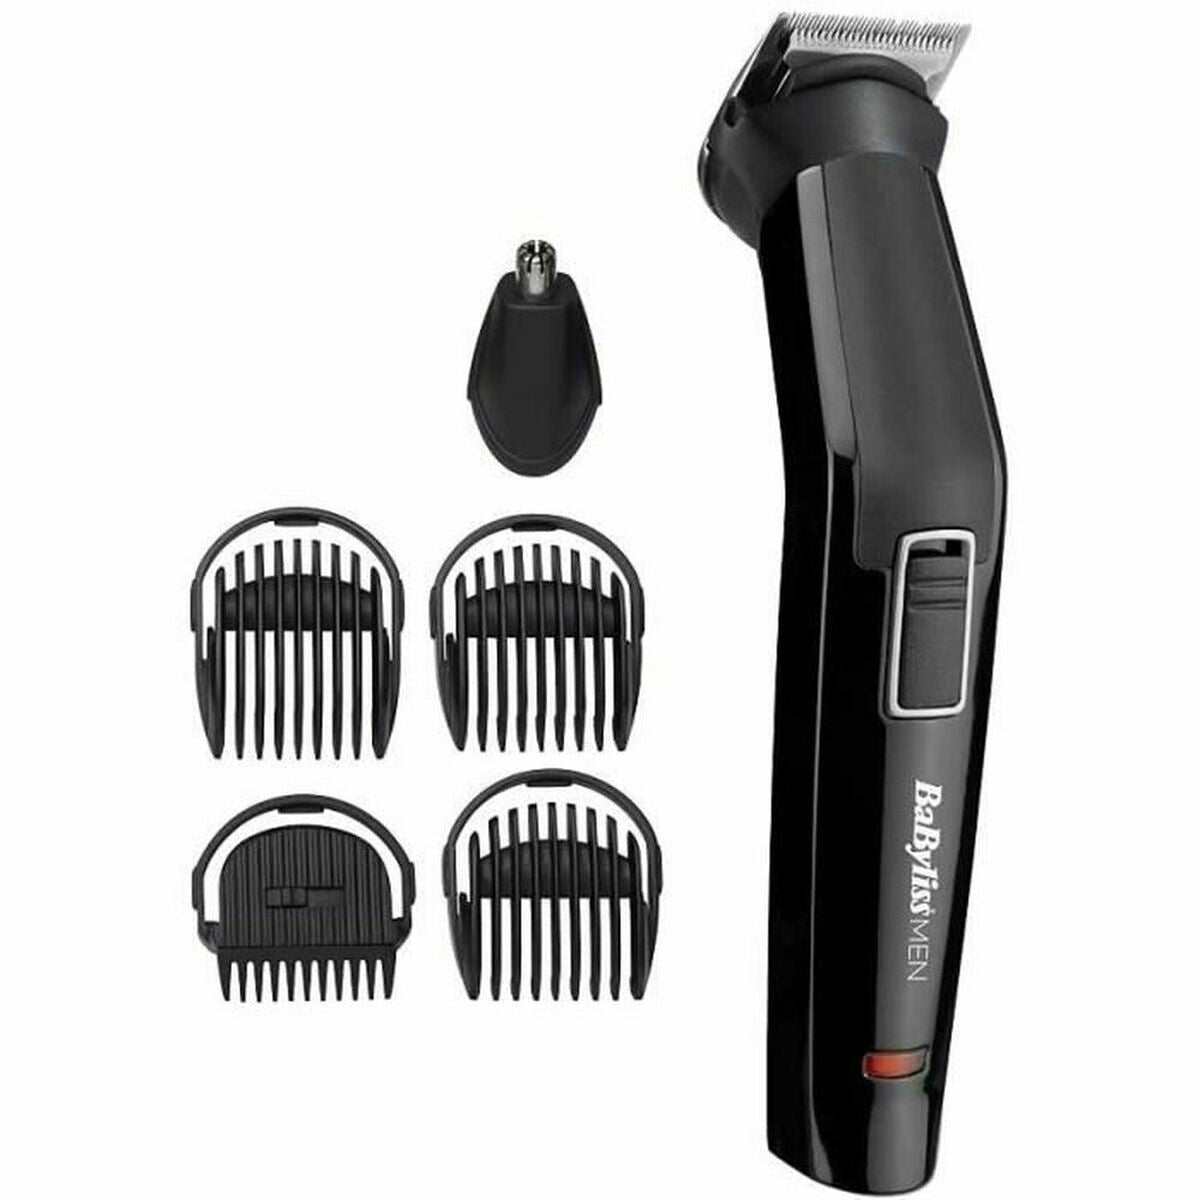 Hair clippers/Shaver Babyliss MT725E-0